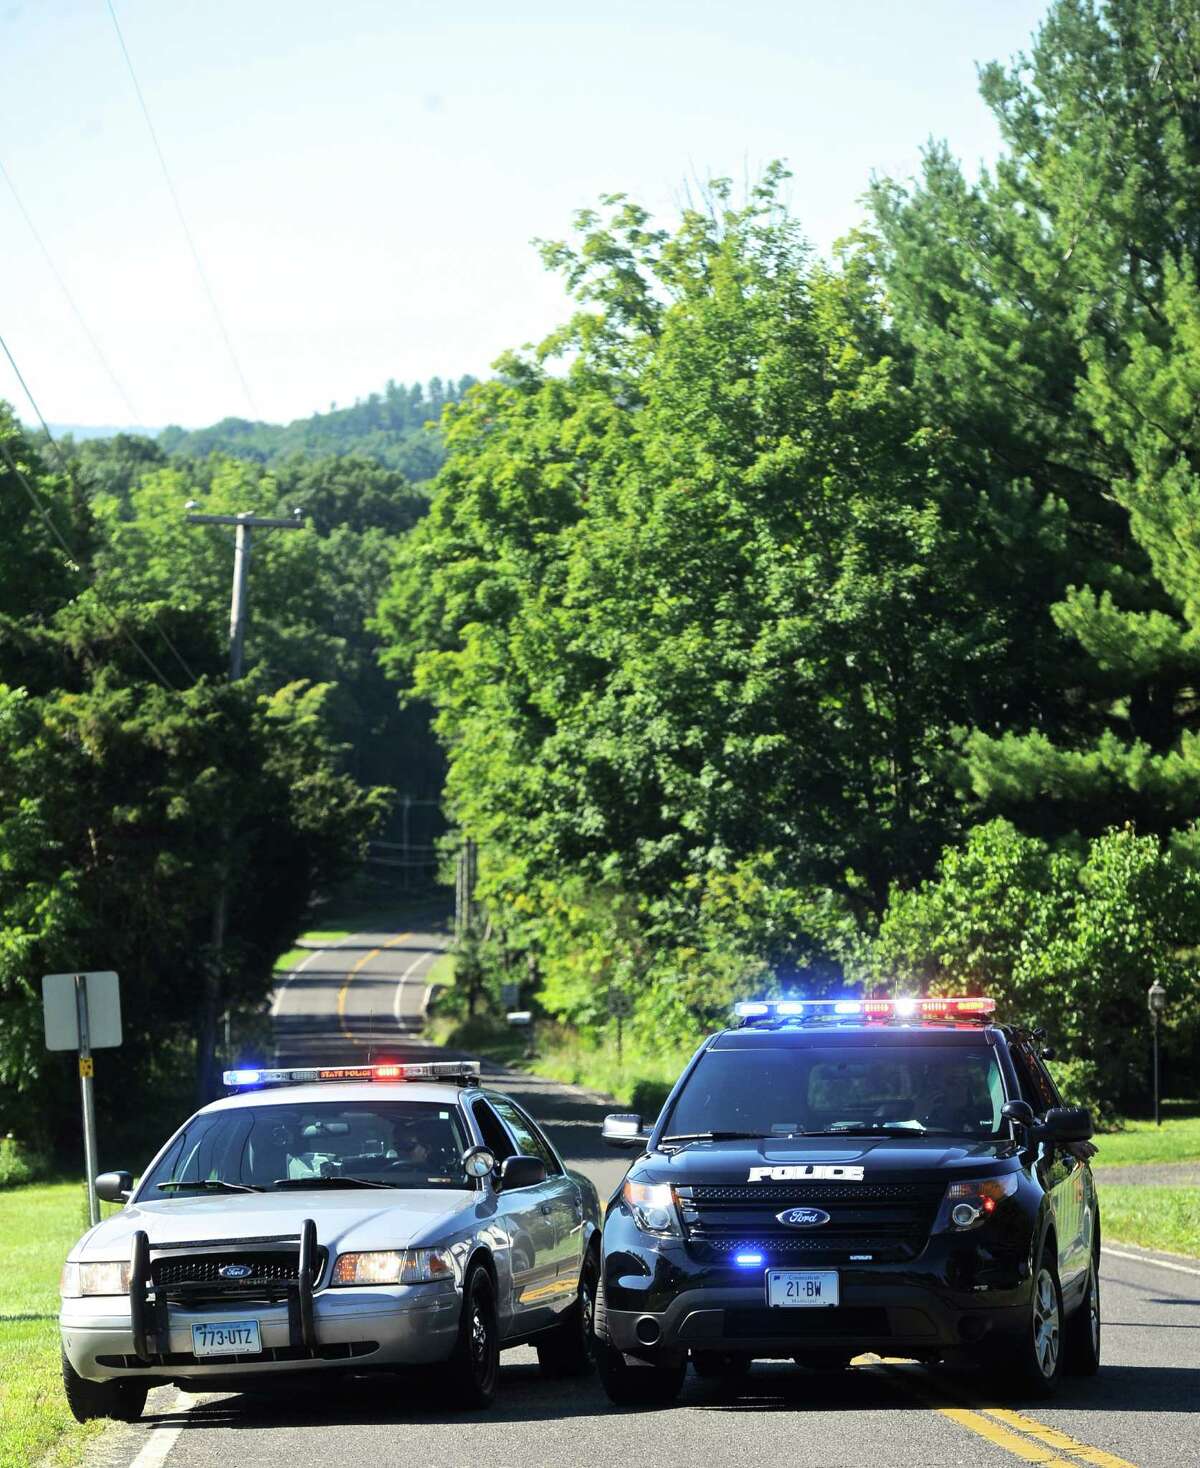 A state trooper and local police close off Rte 133 at the intersection of Main Street S ( Rte 133) and Stuart Road E and Stuart Road W, in Bridgewater. Main Street S was close traffic because of an investigation into a reported shooting and home invasion early Thursday morning. August, 4, 2016, in Bridgewater, Conn. Rte 133 is also closed to thru traffic because of scheduled construction.